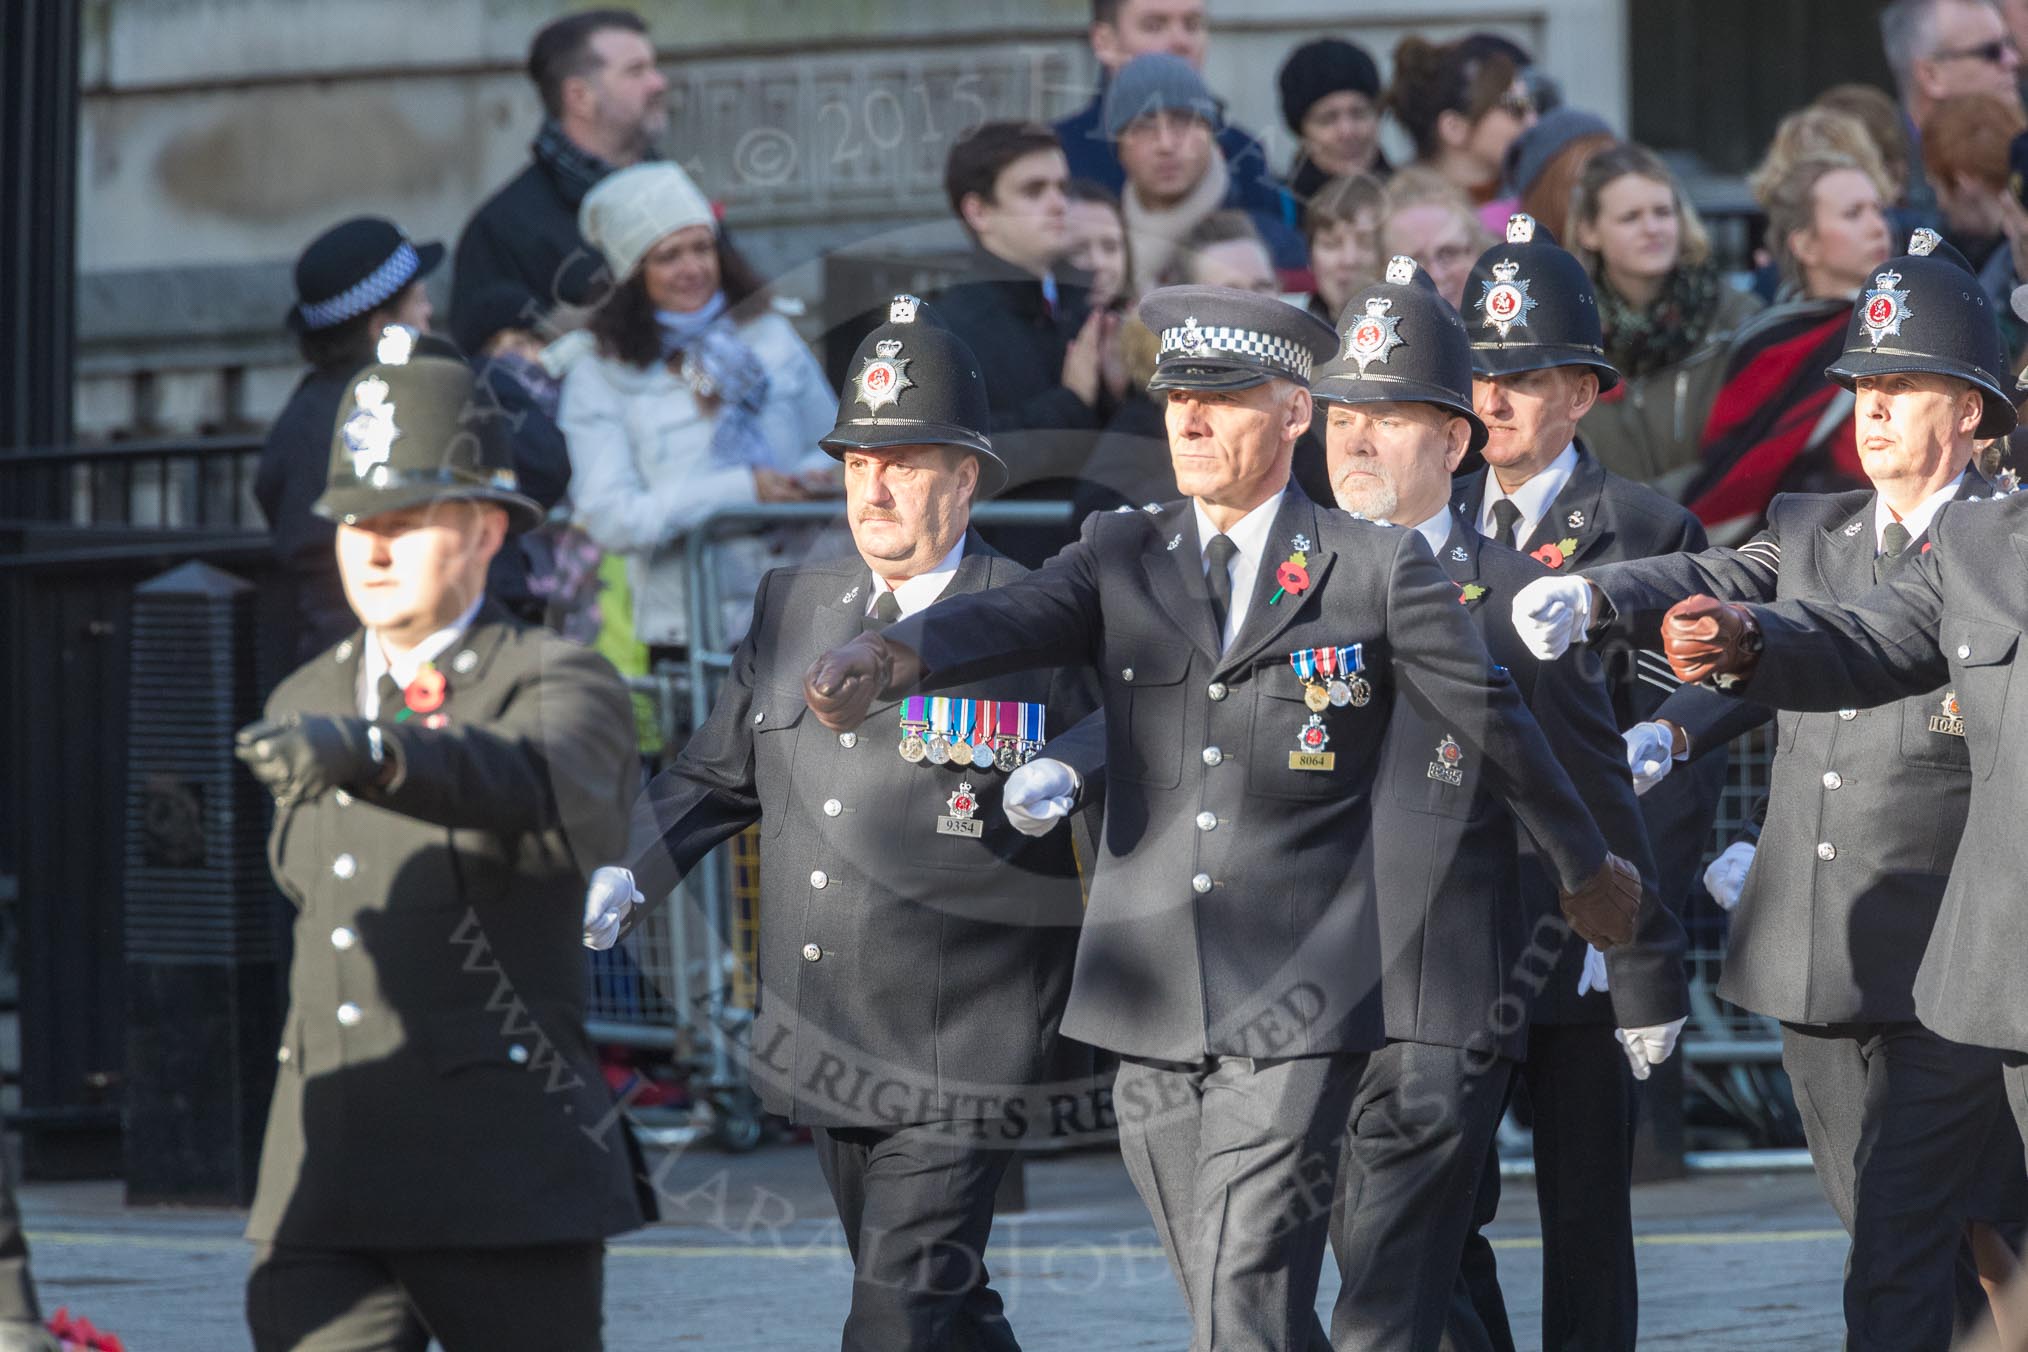 March Past, Remembrance Sunday at the Cenotaph 2016: M39 Kent Police.
Cenotaph, Whitehall, London SW1,
London,
Greater London,
United Kingdom,
on 13 November 2016 at 13:19, image #2923